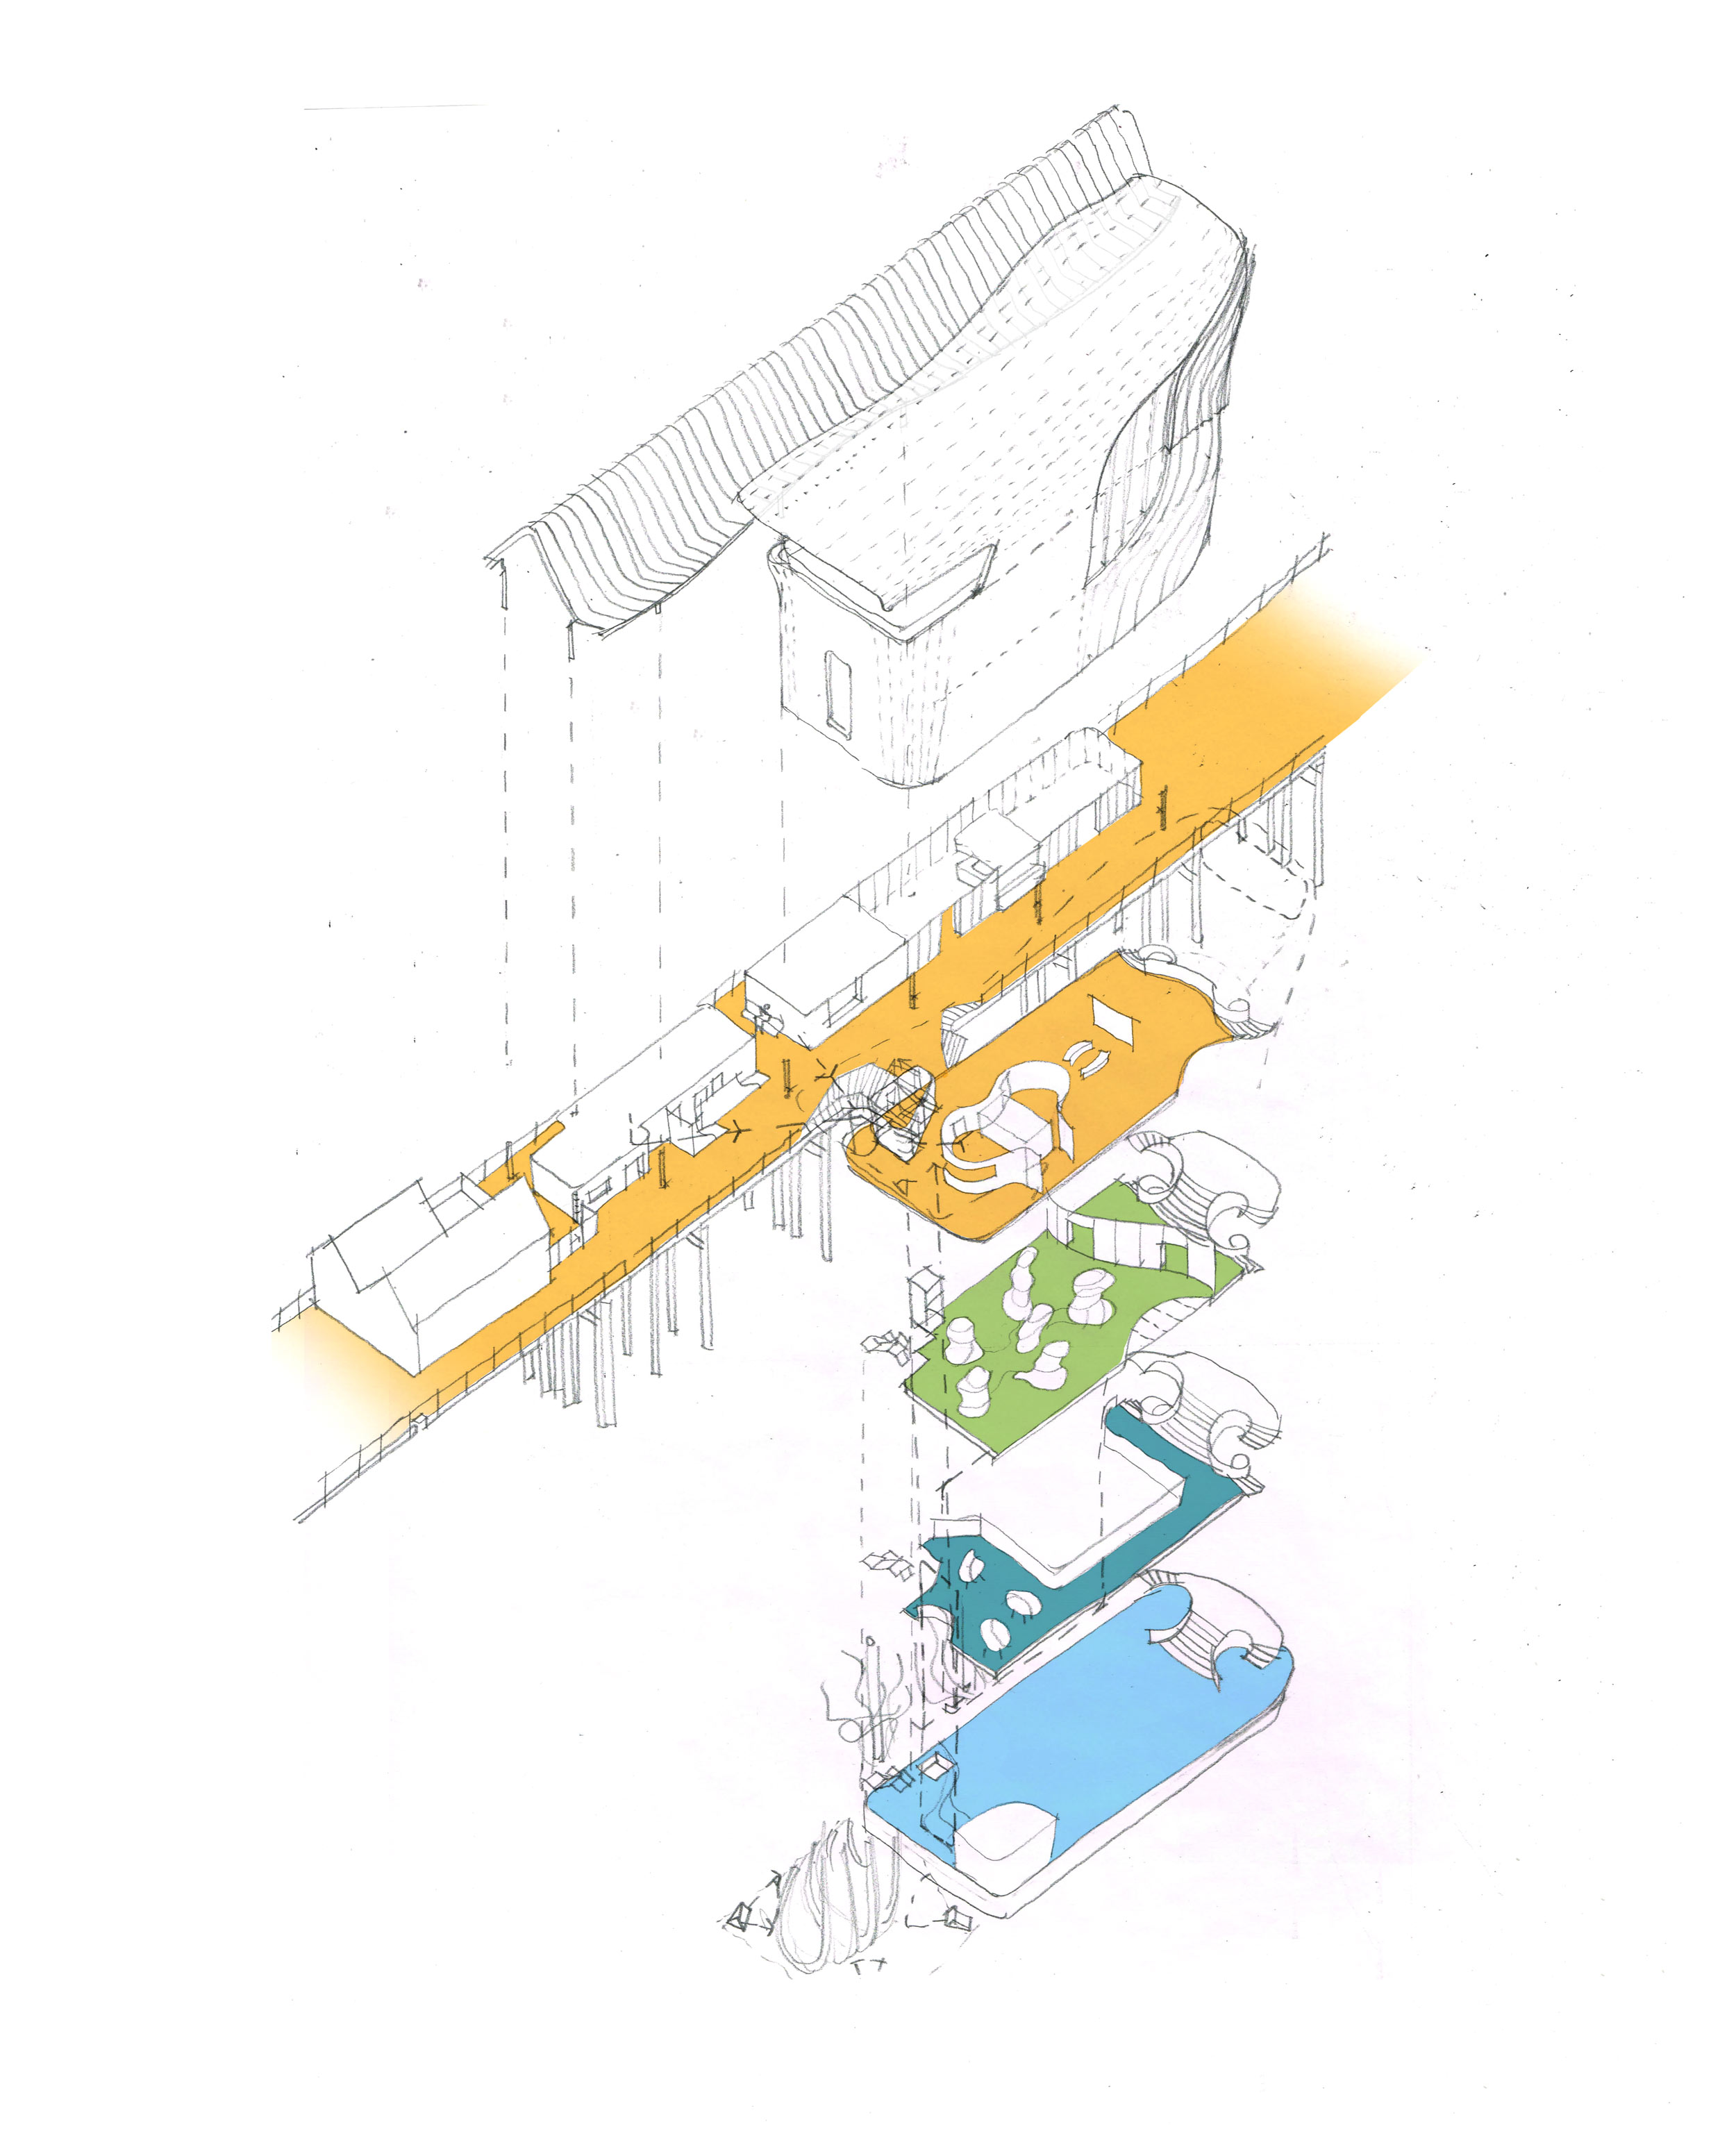 Exploded axonometric drawing of the AUDC building